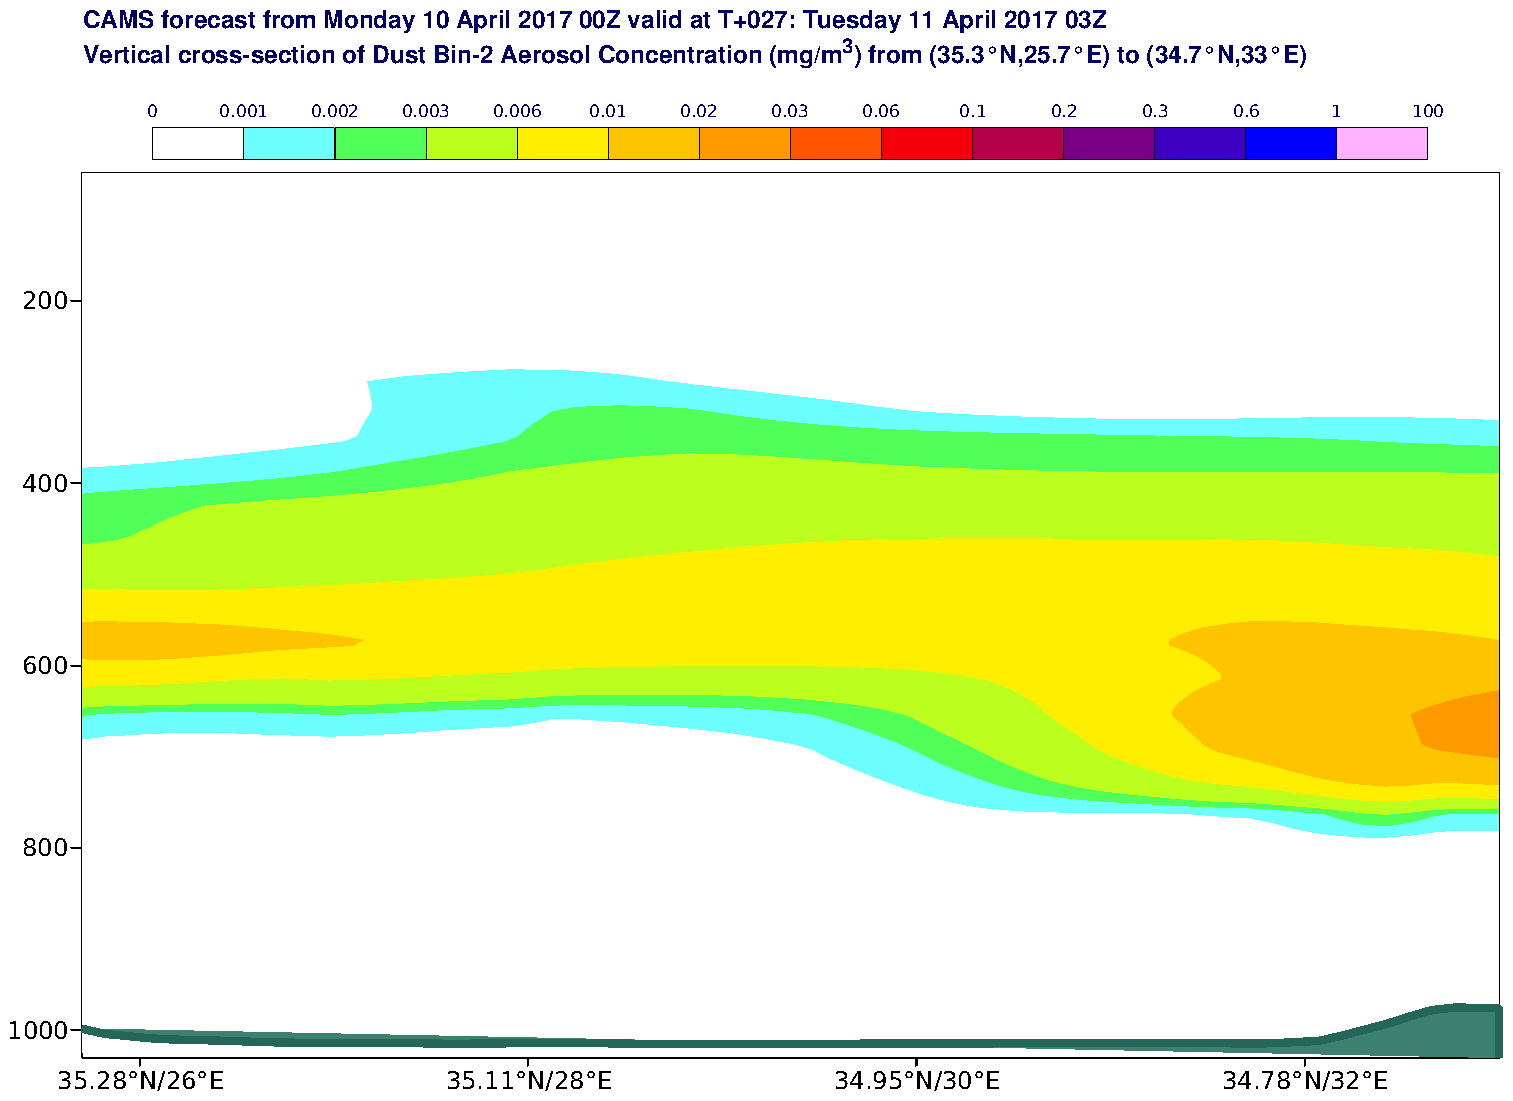 Vertical cross-section of Dust Bin-2 Aerosol Concentration (mg/m3) valid at T27 - 2017-04-11 03:00